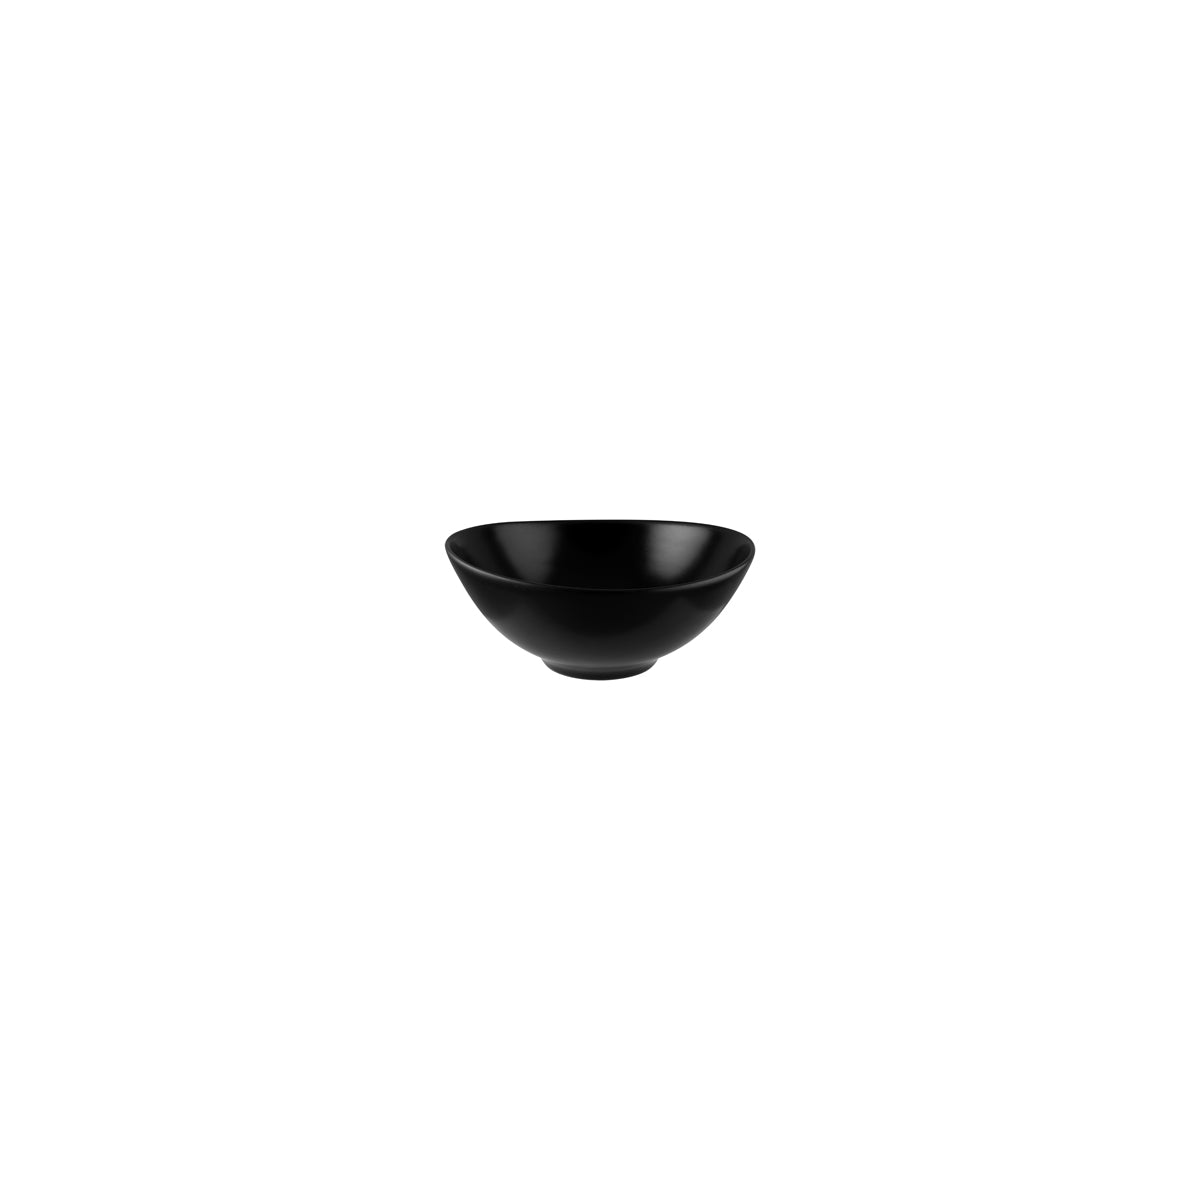 Notte Agora Round Bowl 110mm, 120ml : Pack of 12